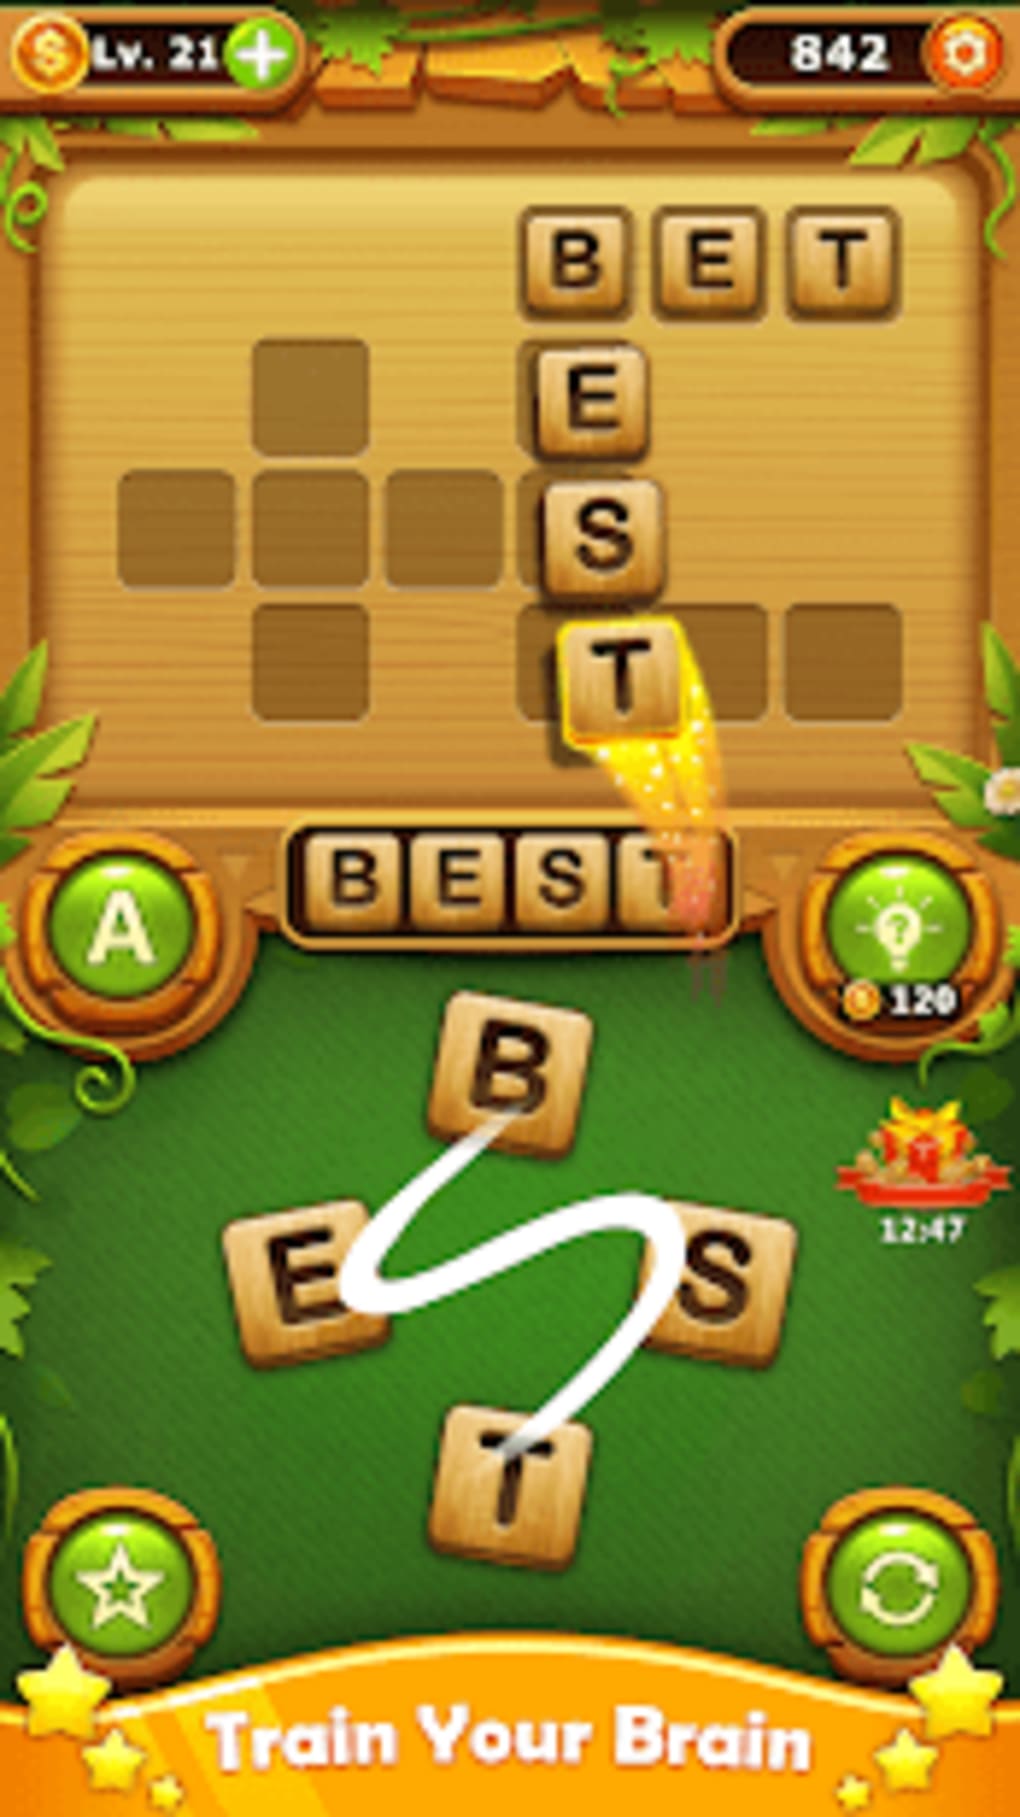 Word Cross Puzzle: Best Free Offline Word Games APK for Android